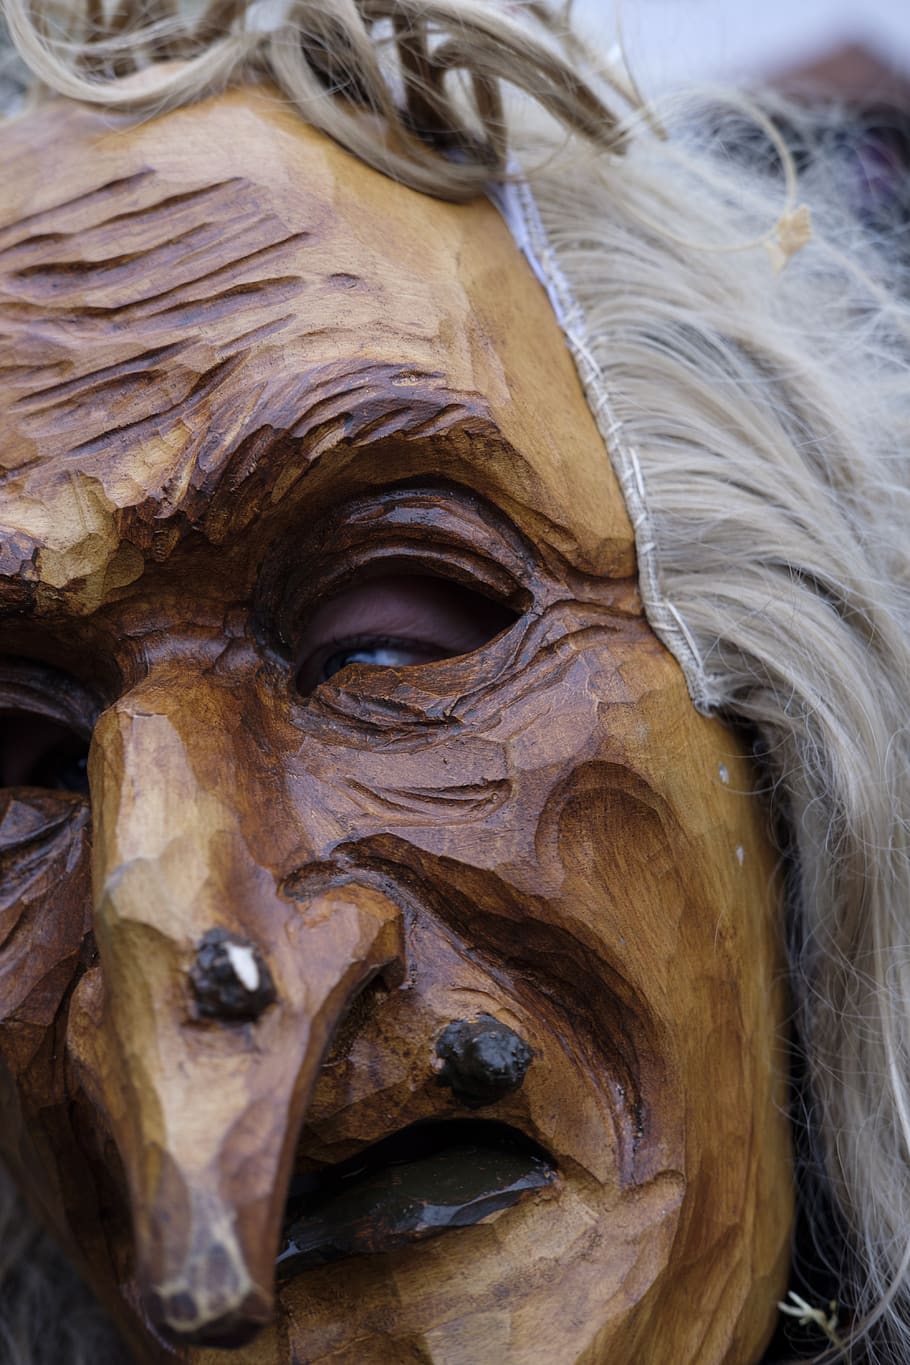 mask, wooden mask, the witch, carnival, fools, foolish, panel, costume, close-up, art and craft